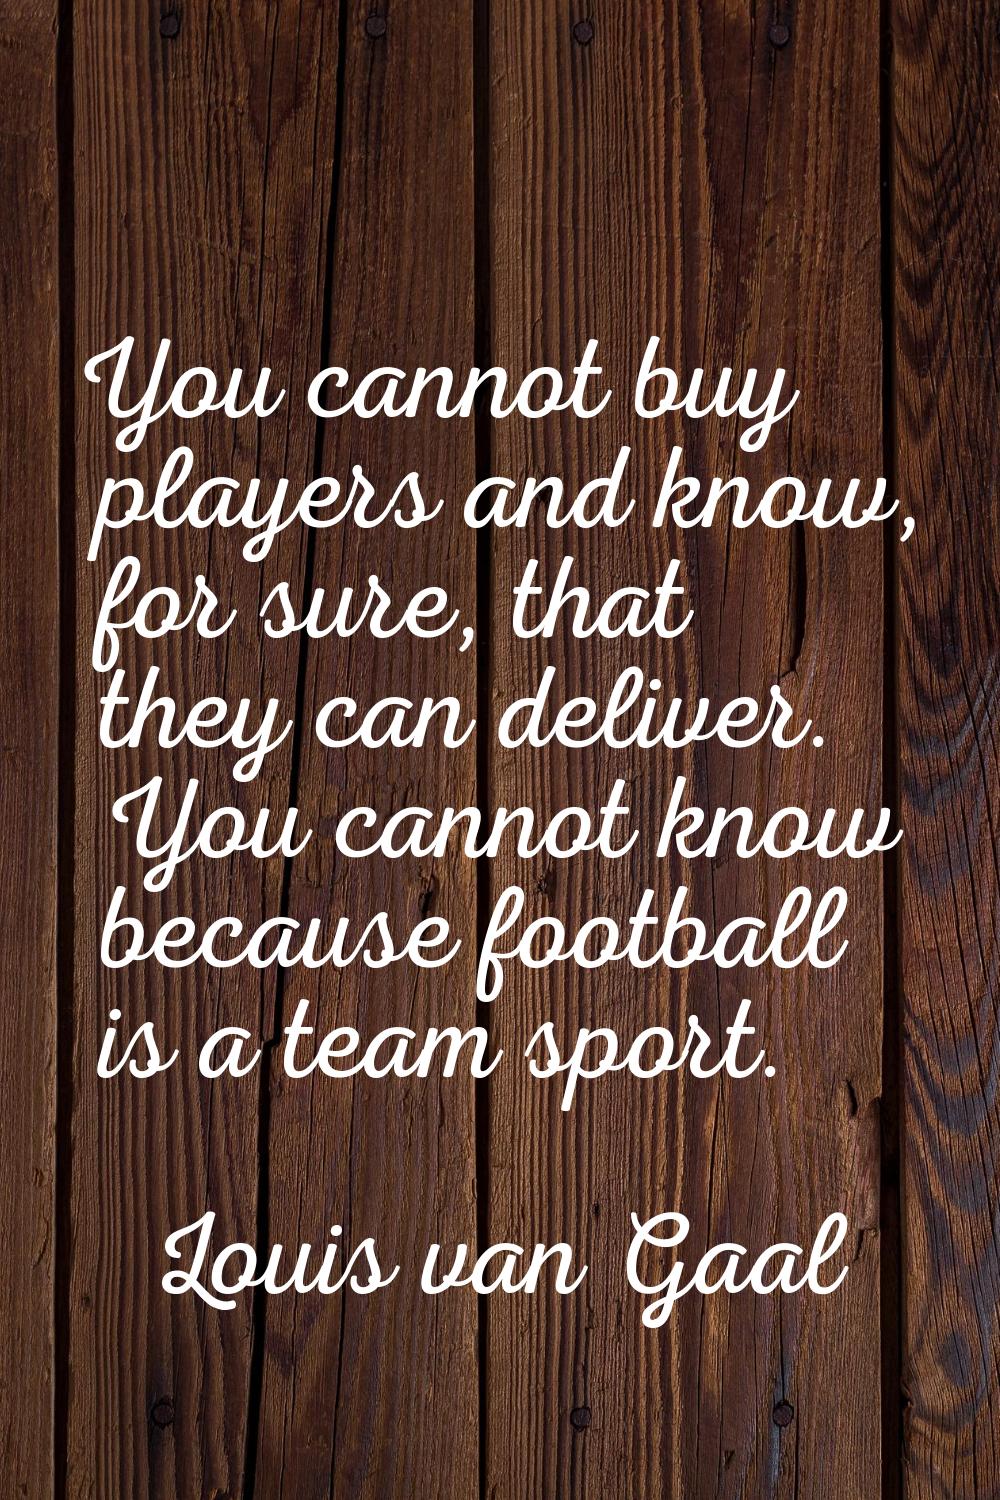 You cannot buy players and know, for sure, that they can deliver. You cannot know because football 